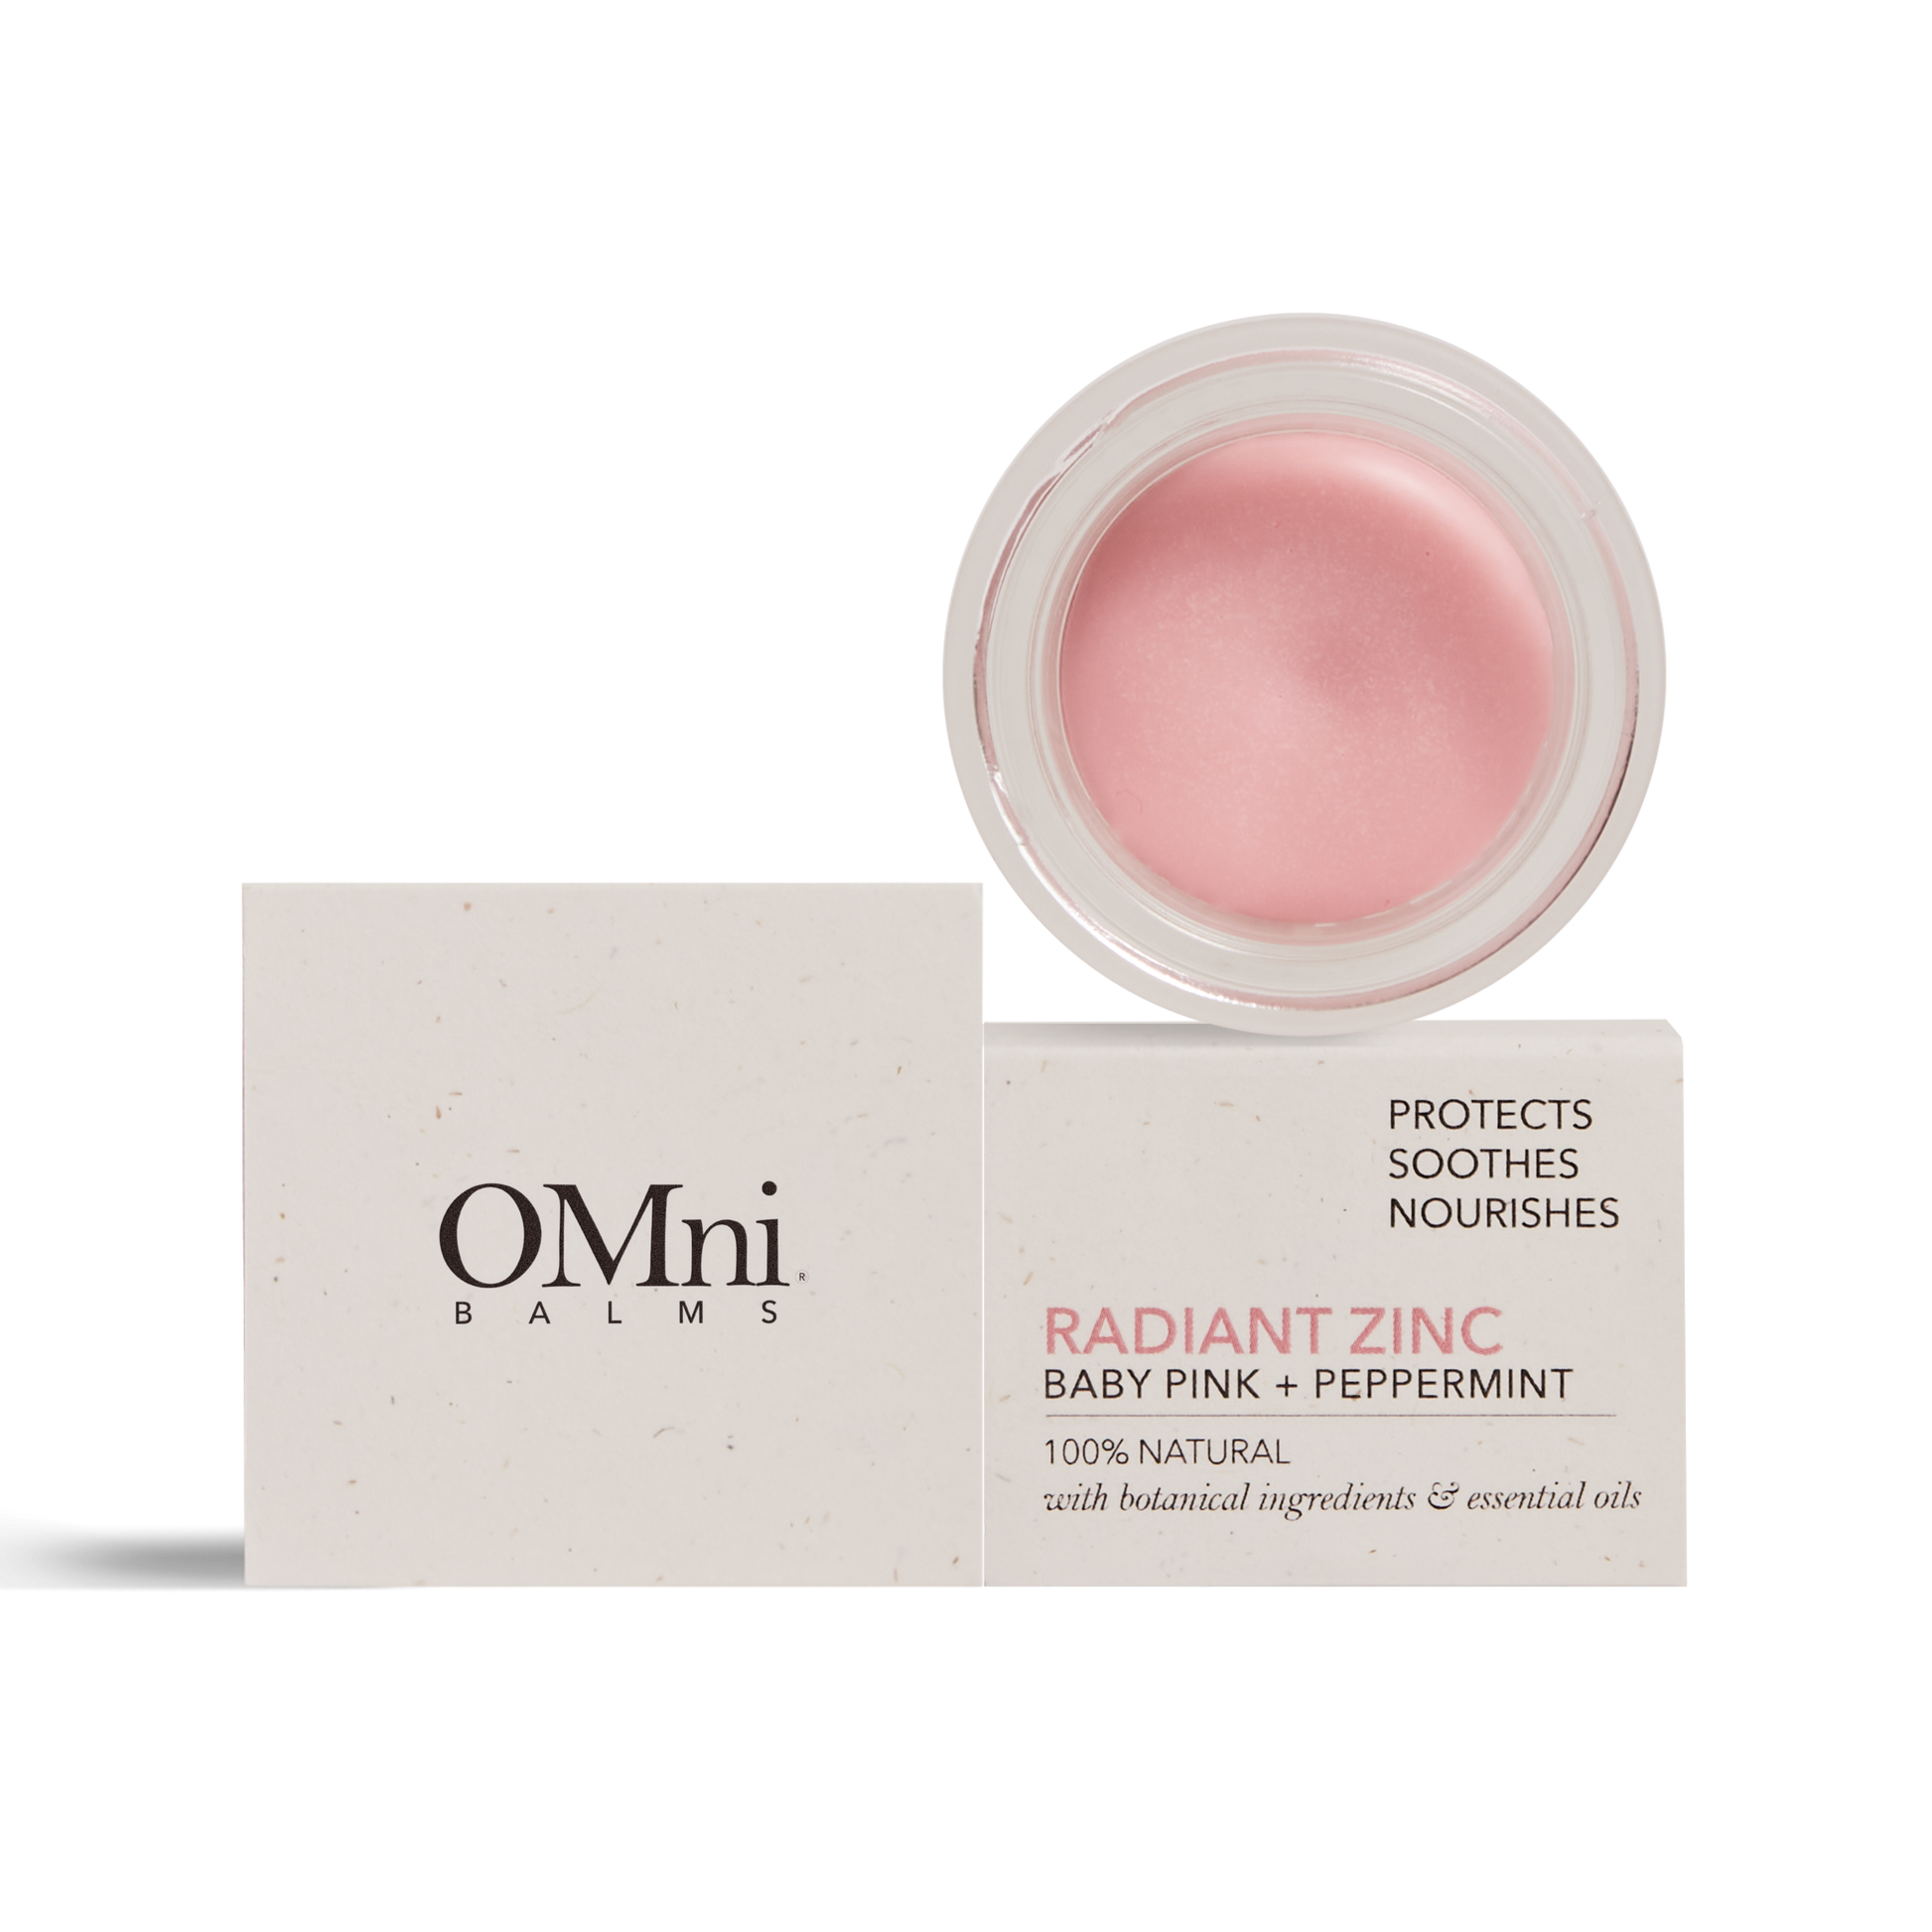 OMni Radiant Zinc Baby Pink natural multi-use balm for dry lips and skin, highlighter on cheeks